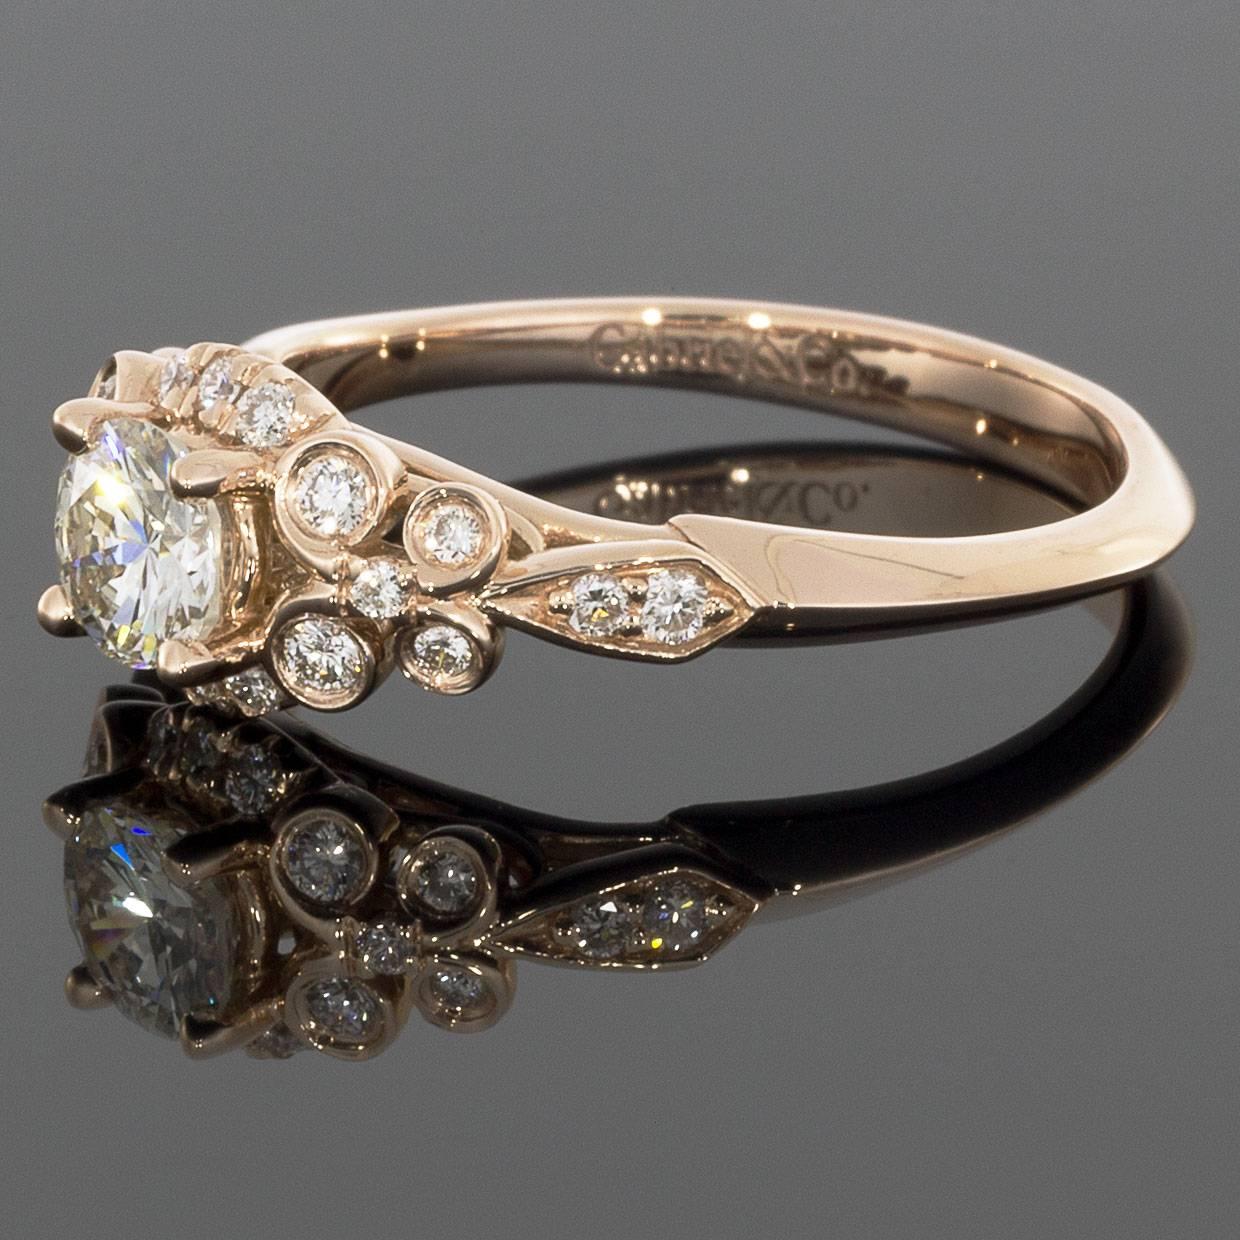 This vintage style 14K rose gold engagement ring features a 0.42CT round center diamond and 0.62CTW diamond accents. This beautiful ring will arrive in a beautiful presentation box. 